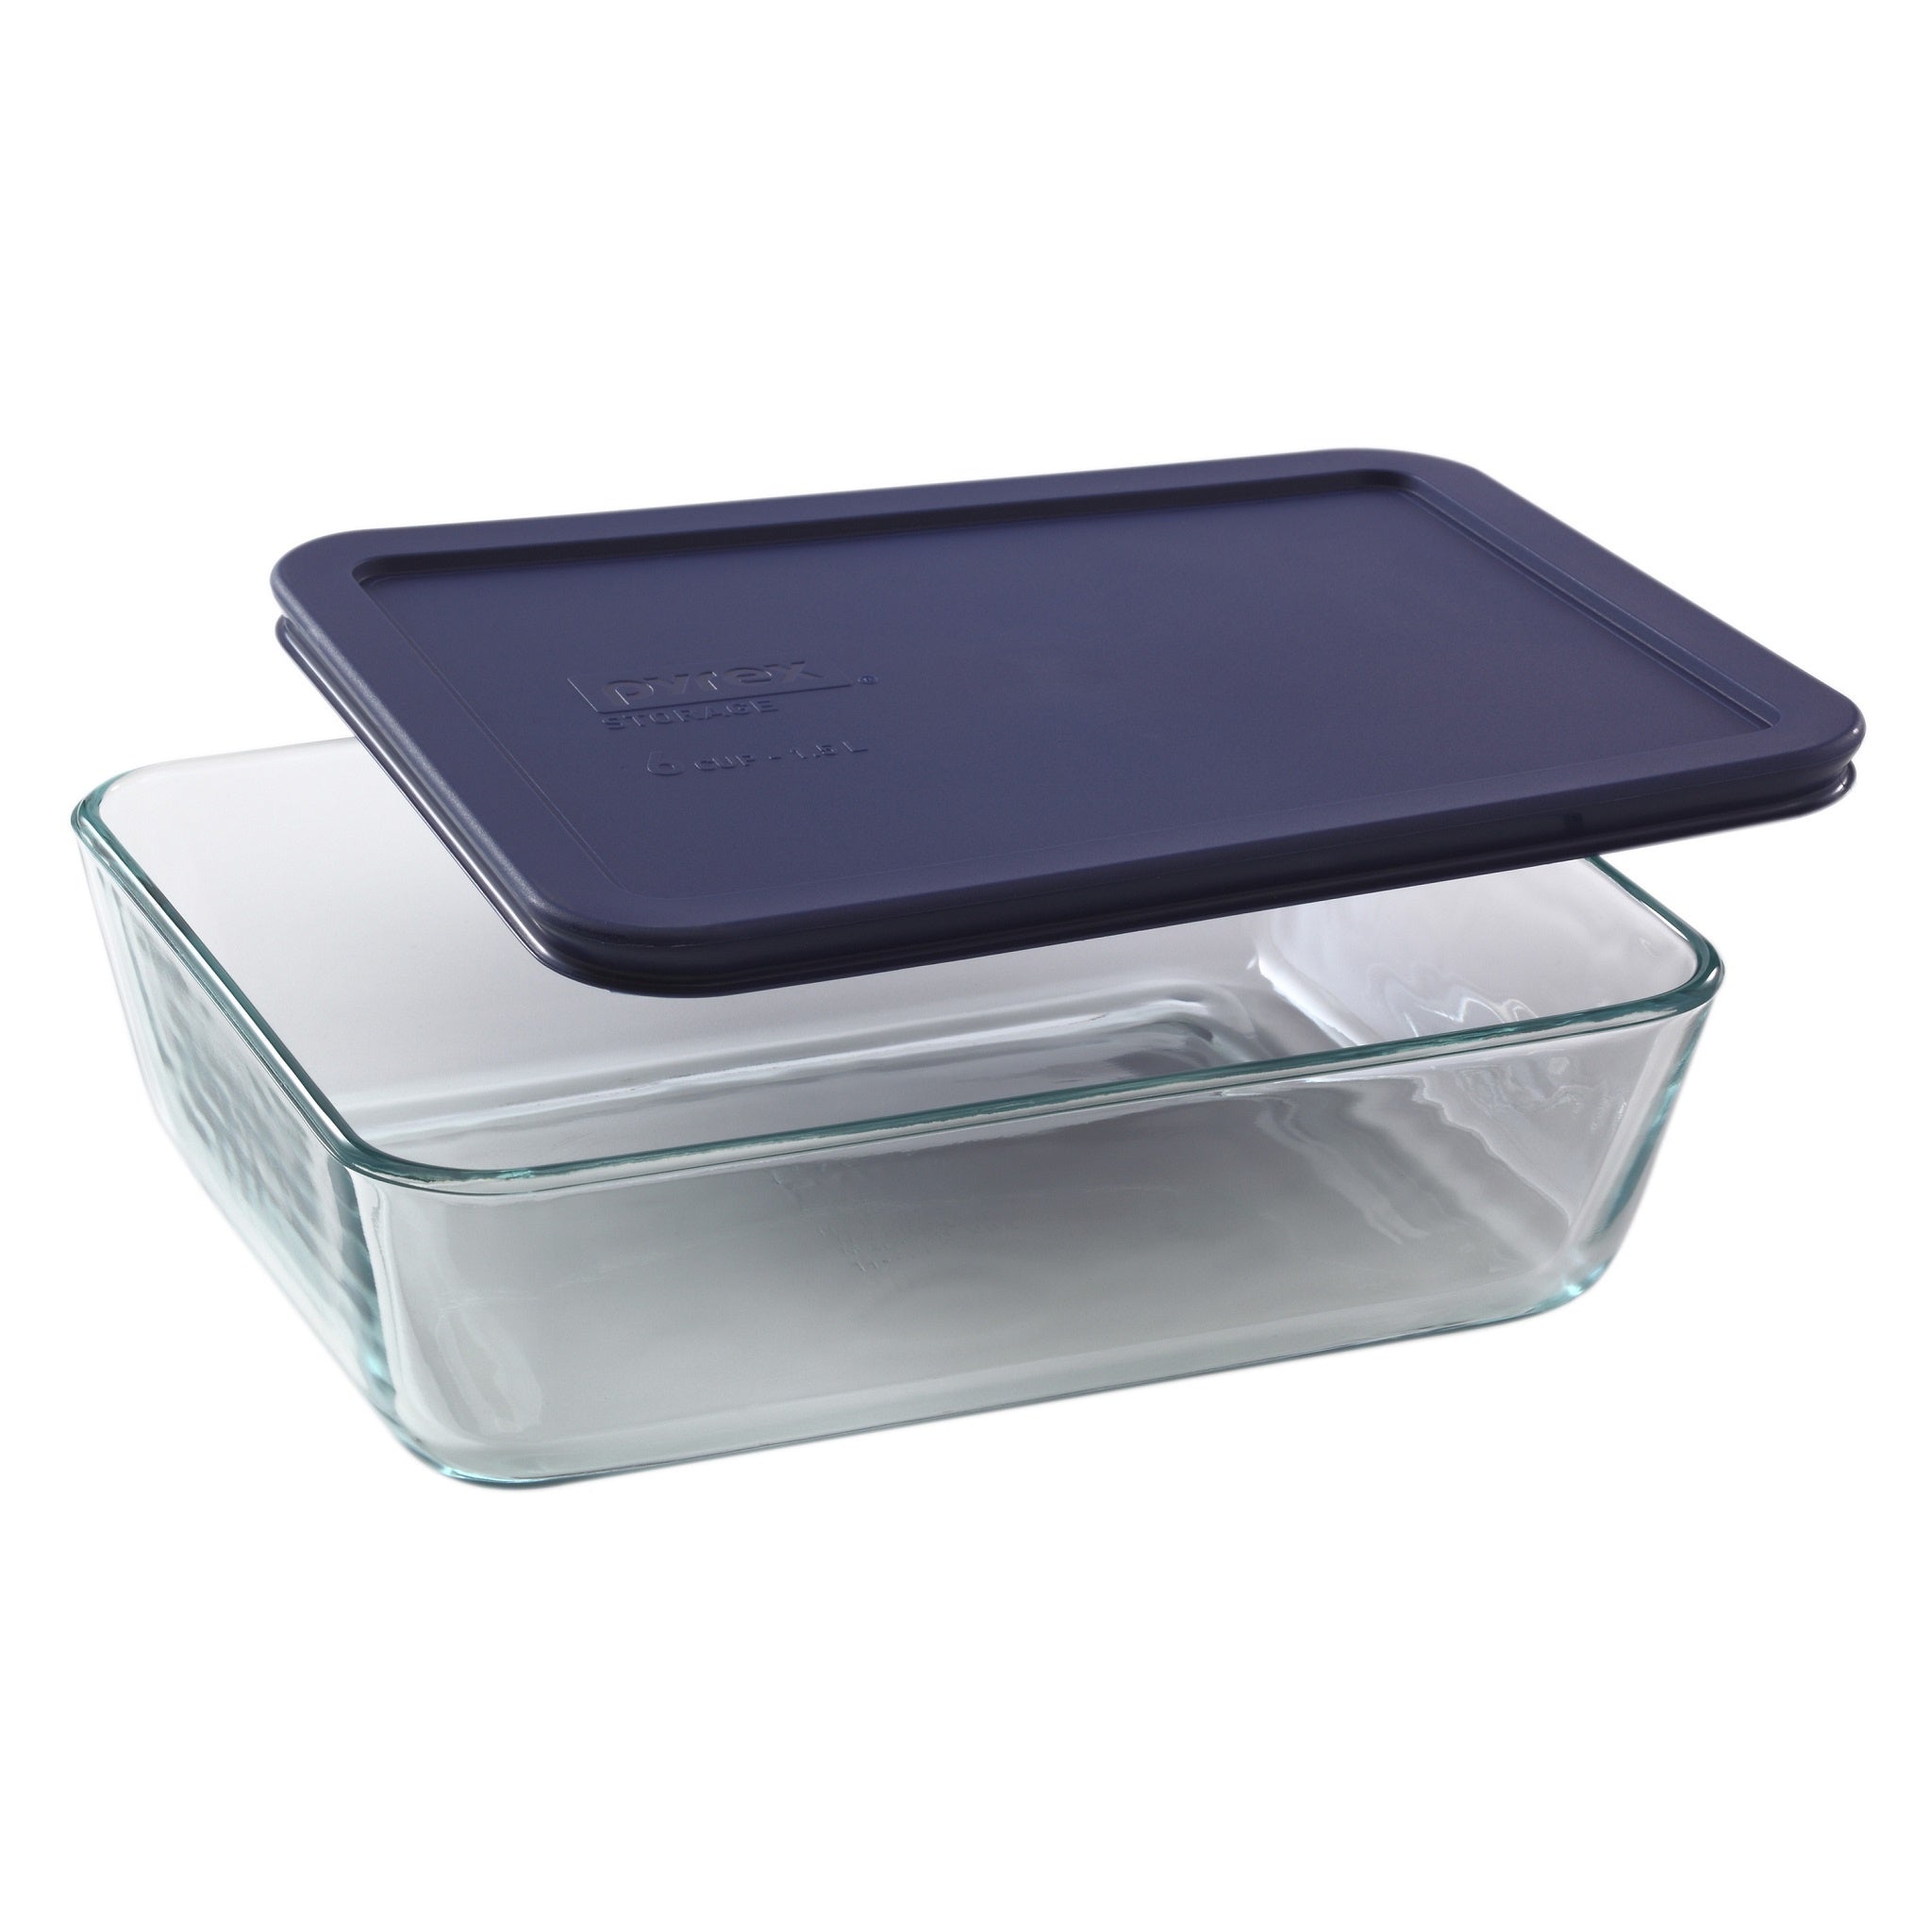 Pyrex® Simply Store Blue Rectangle 6 Cup